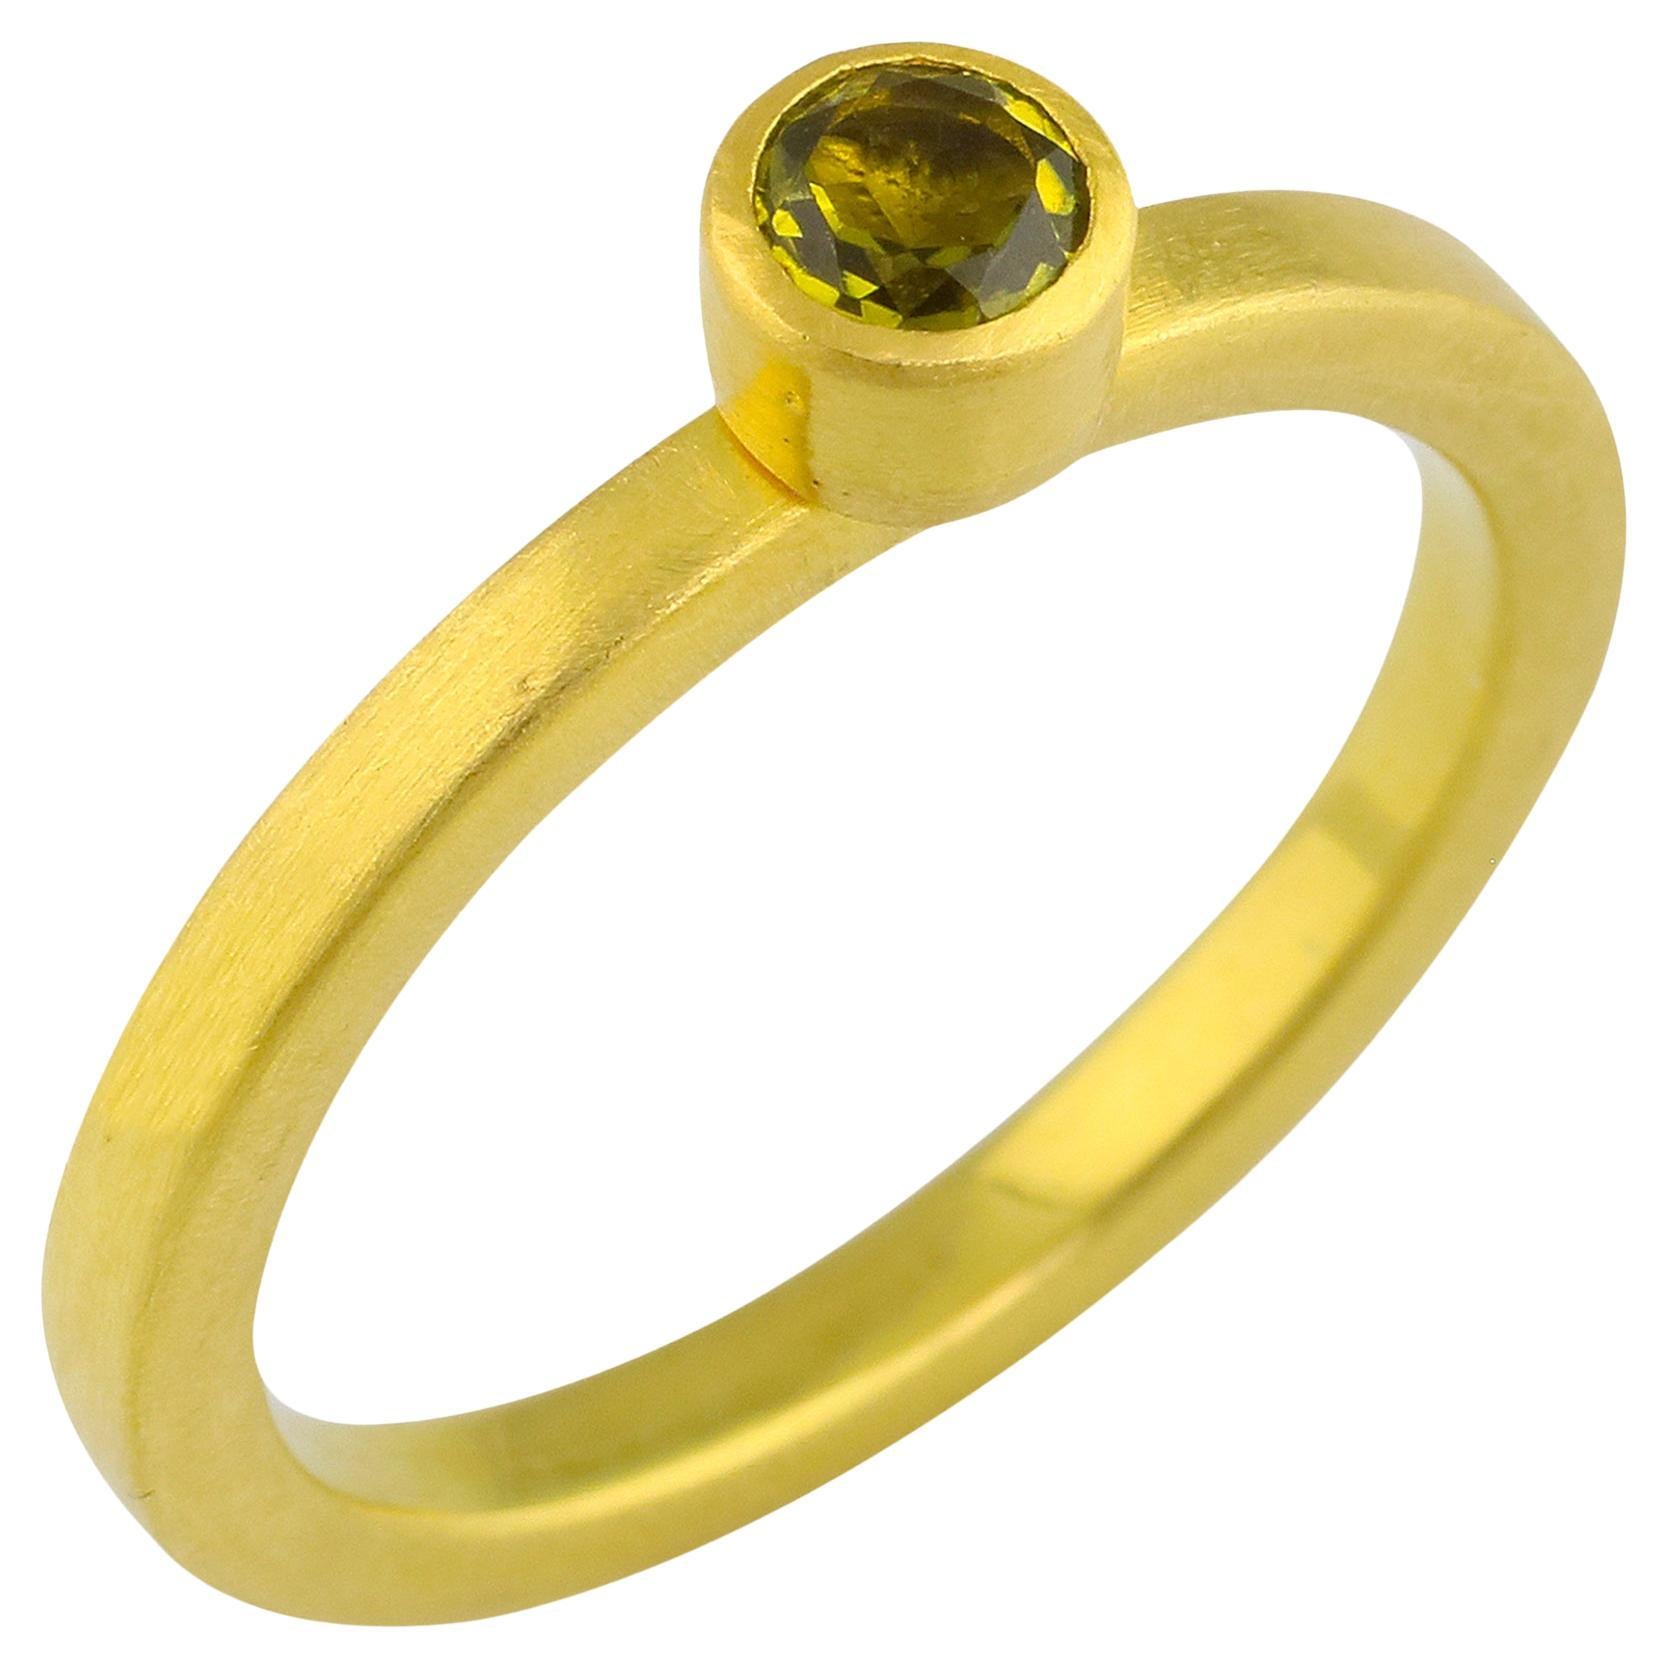 PHILIPPE SPENCER .24 Ct. Olive Tourmaline in 22K and 20K Gold Solitaire Ring For Sale